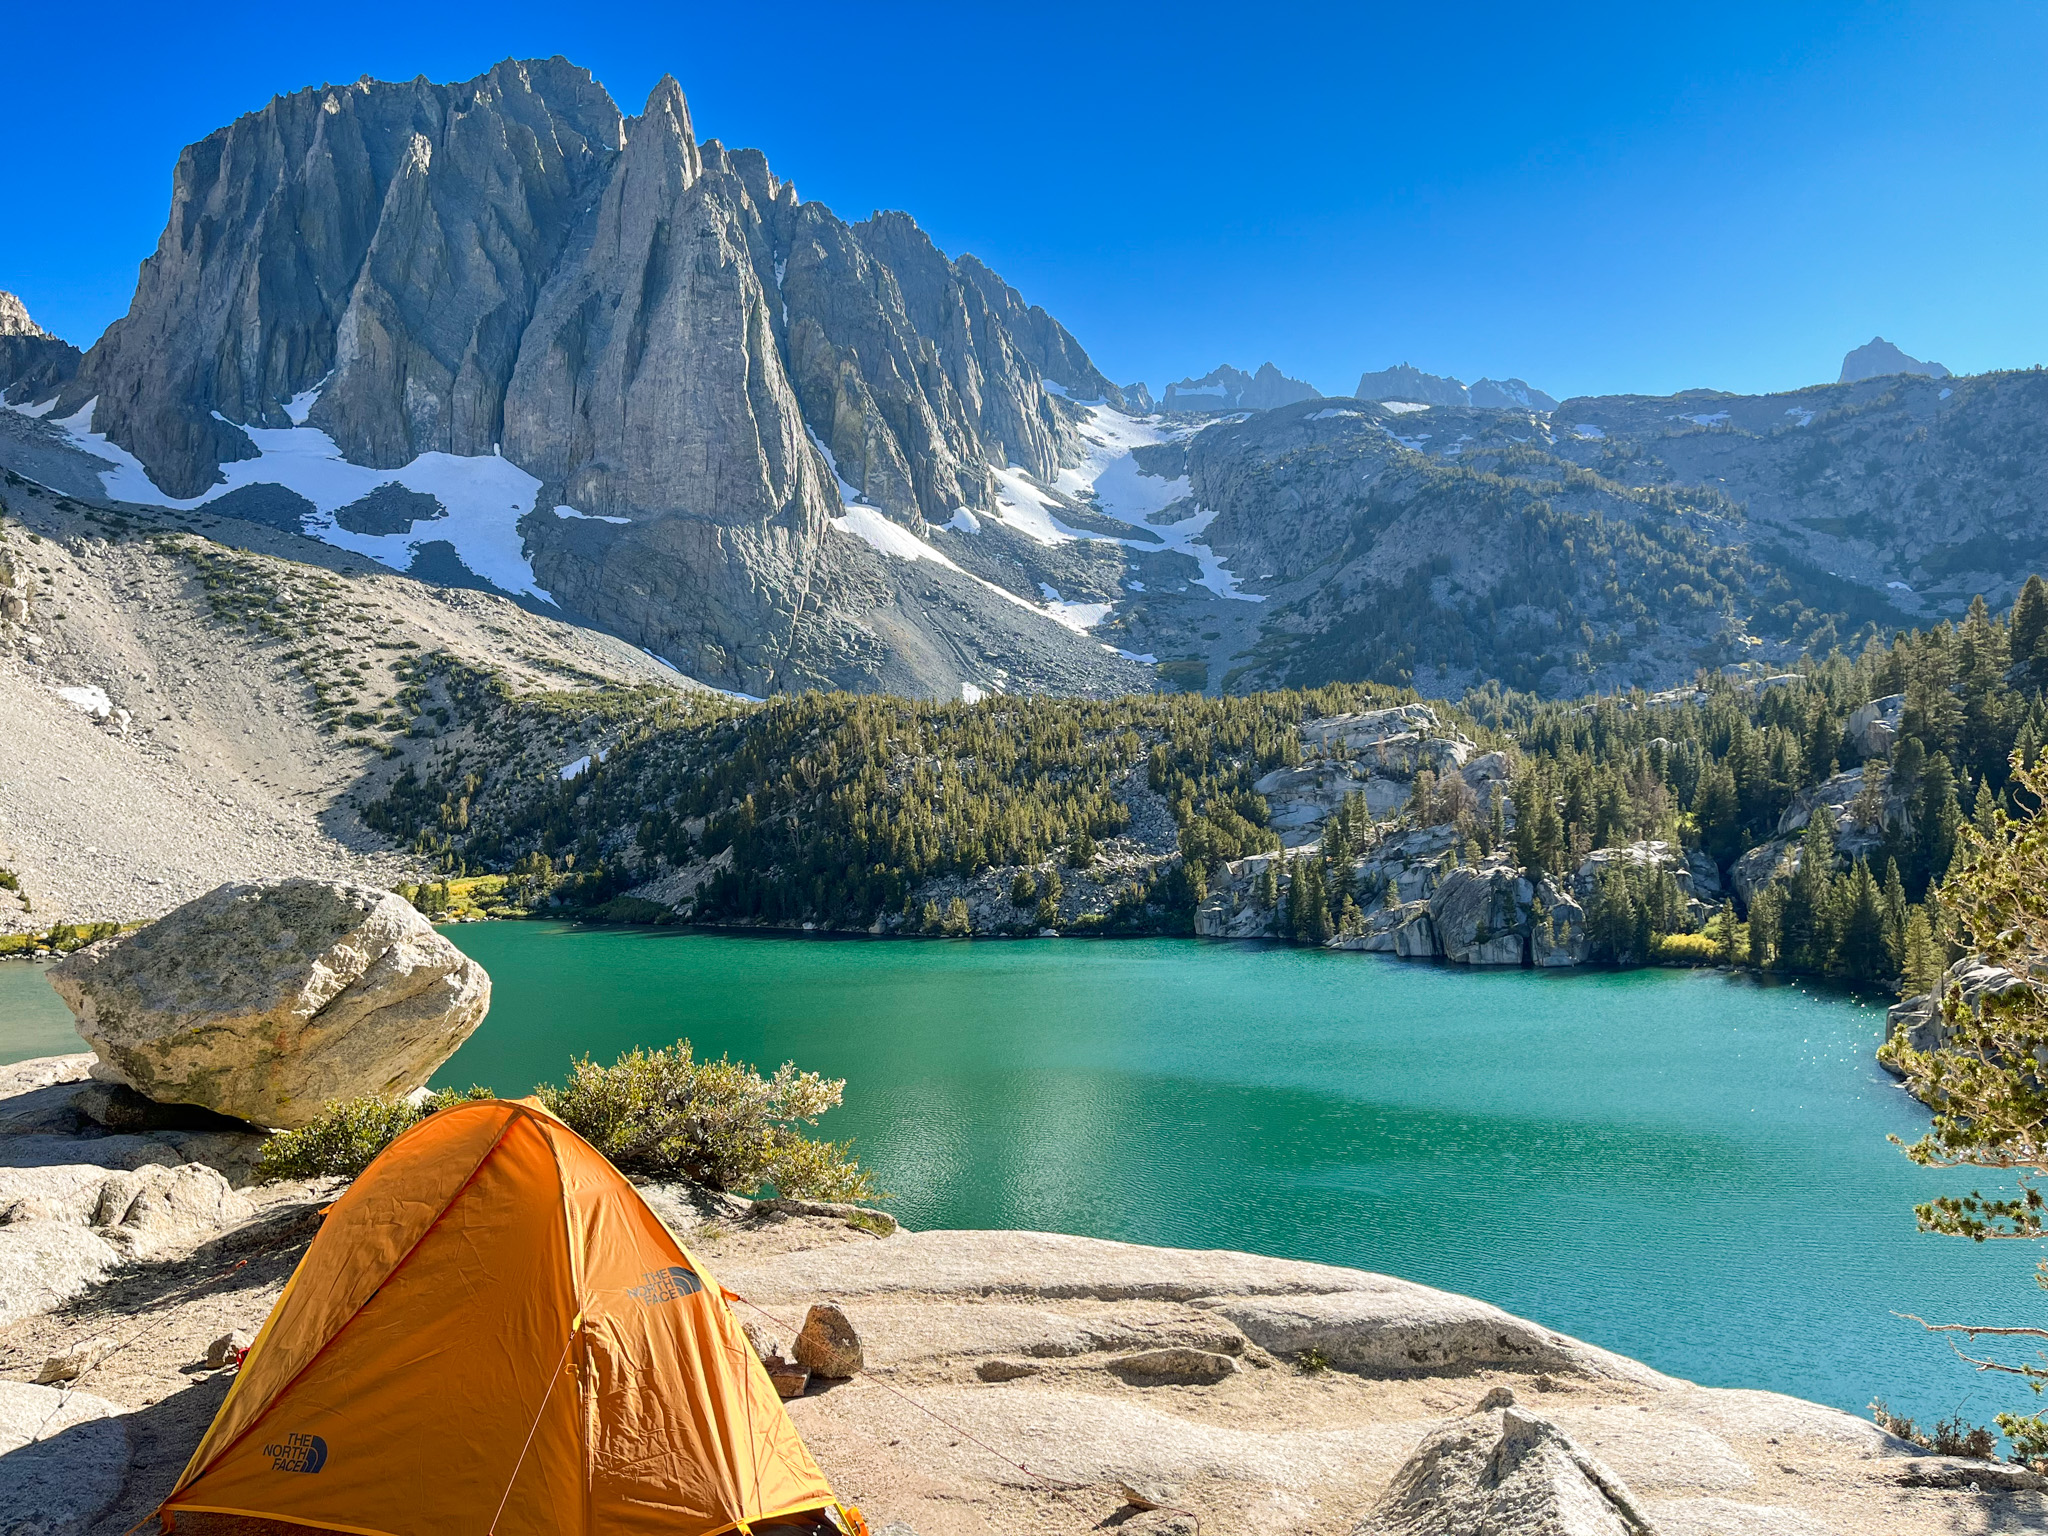 backpacking setup with a camping tent overlooking an alpine lake